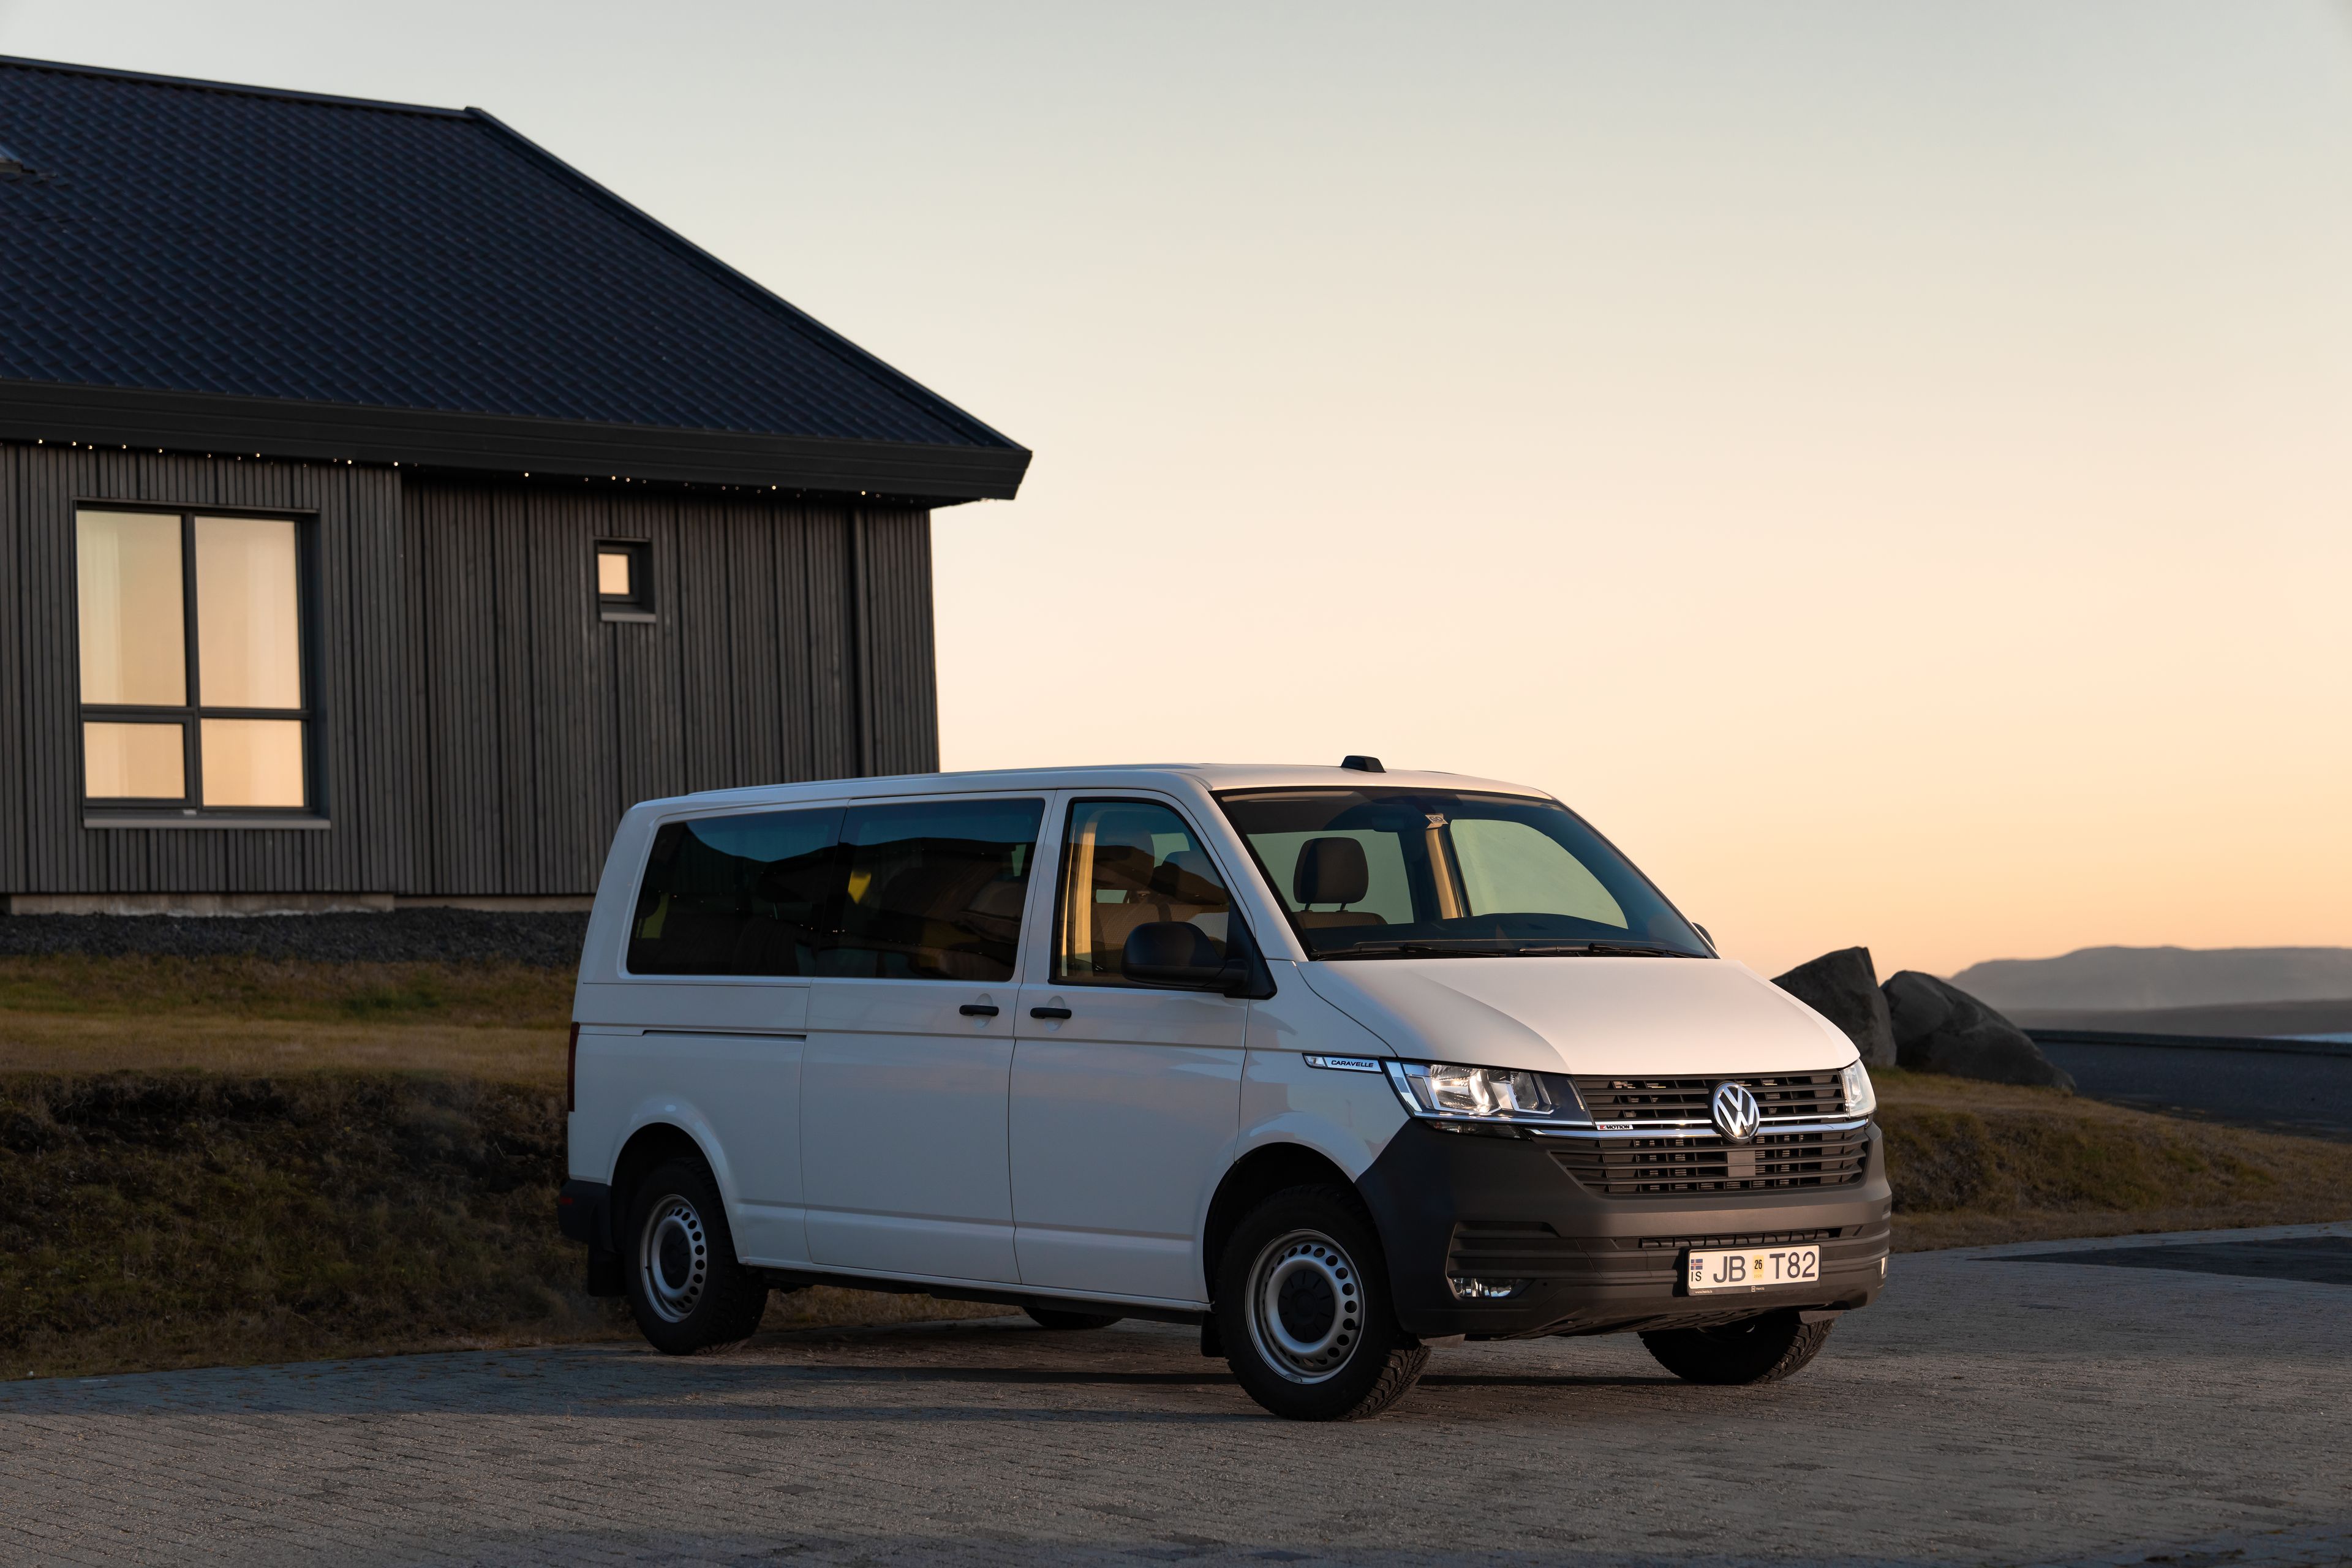 4x4 9 seater rental car in iceland- Volkswagen Caravell